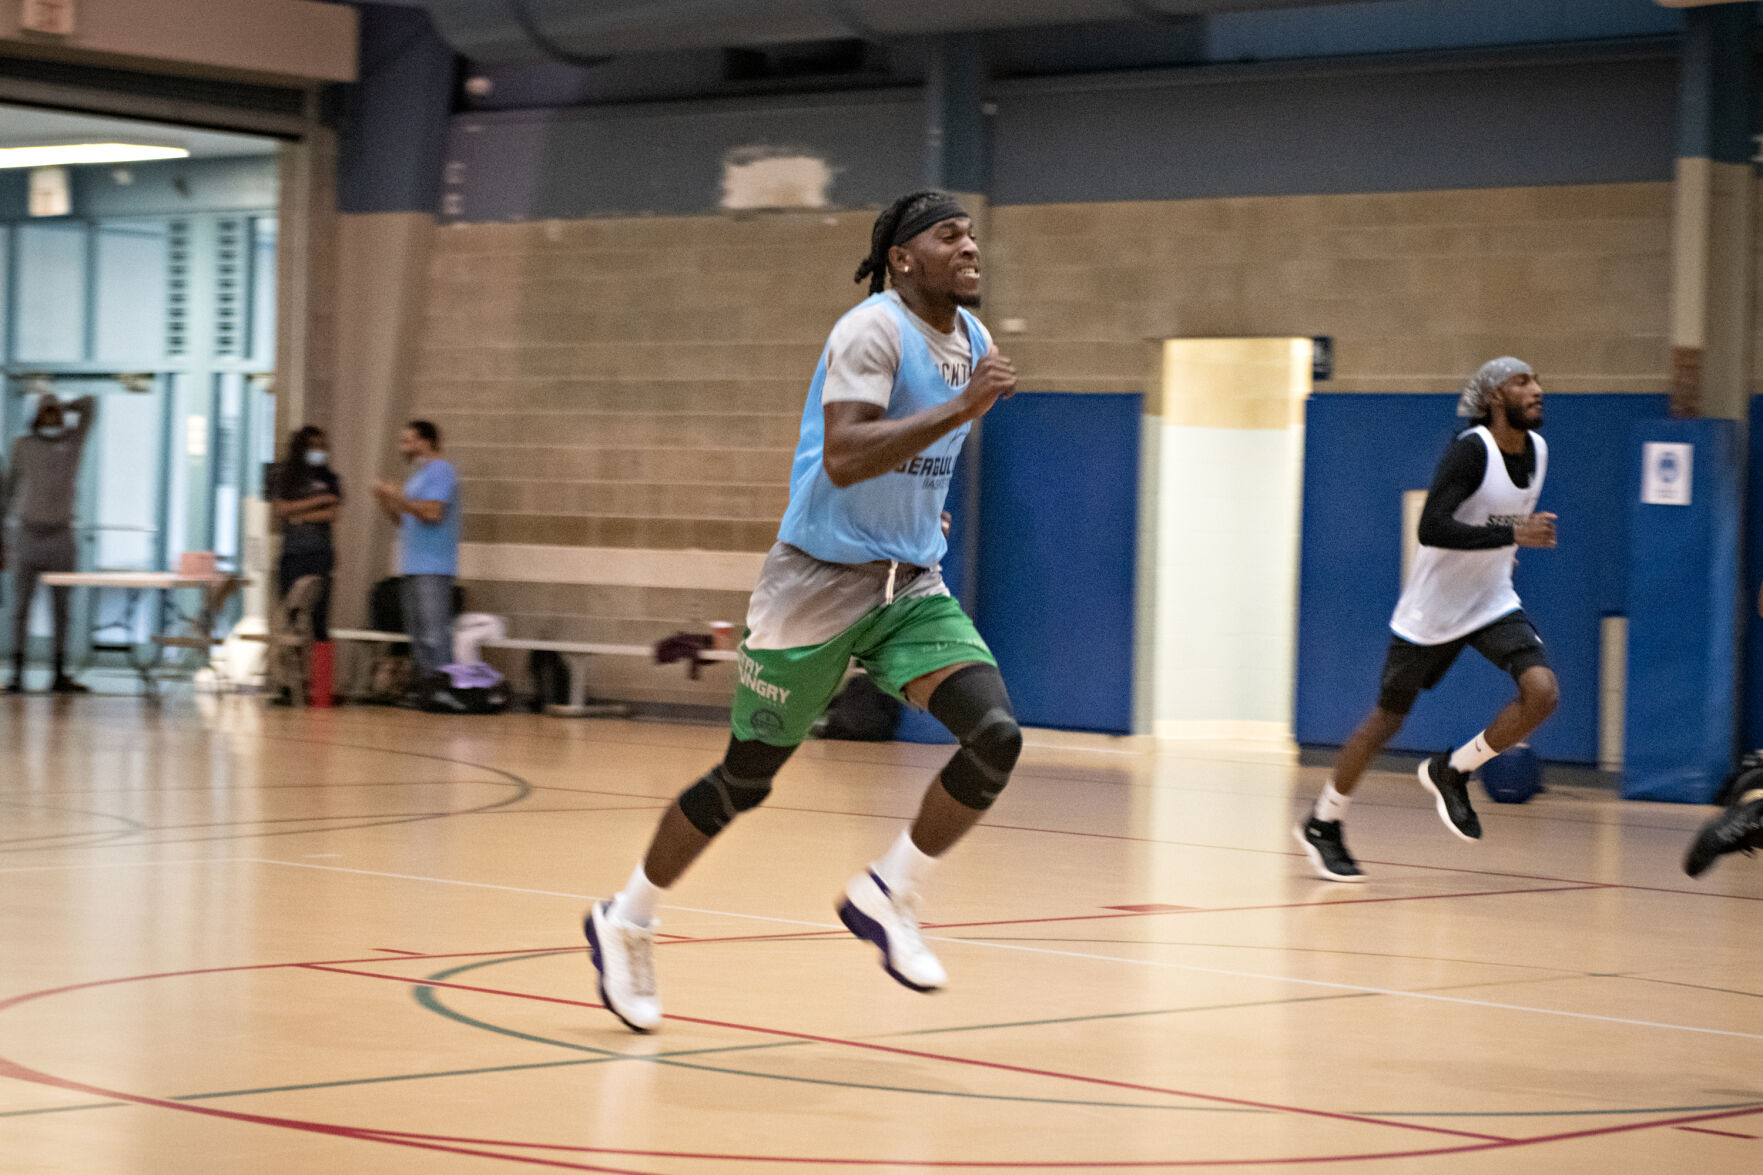 Locals with hoop dreams try out for re-formed Atlantic City Seagulls